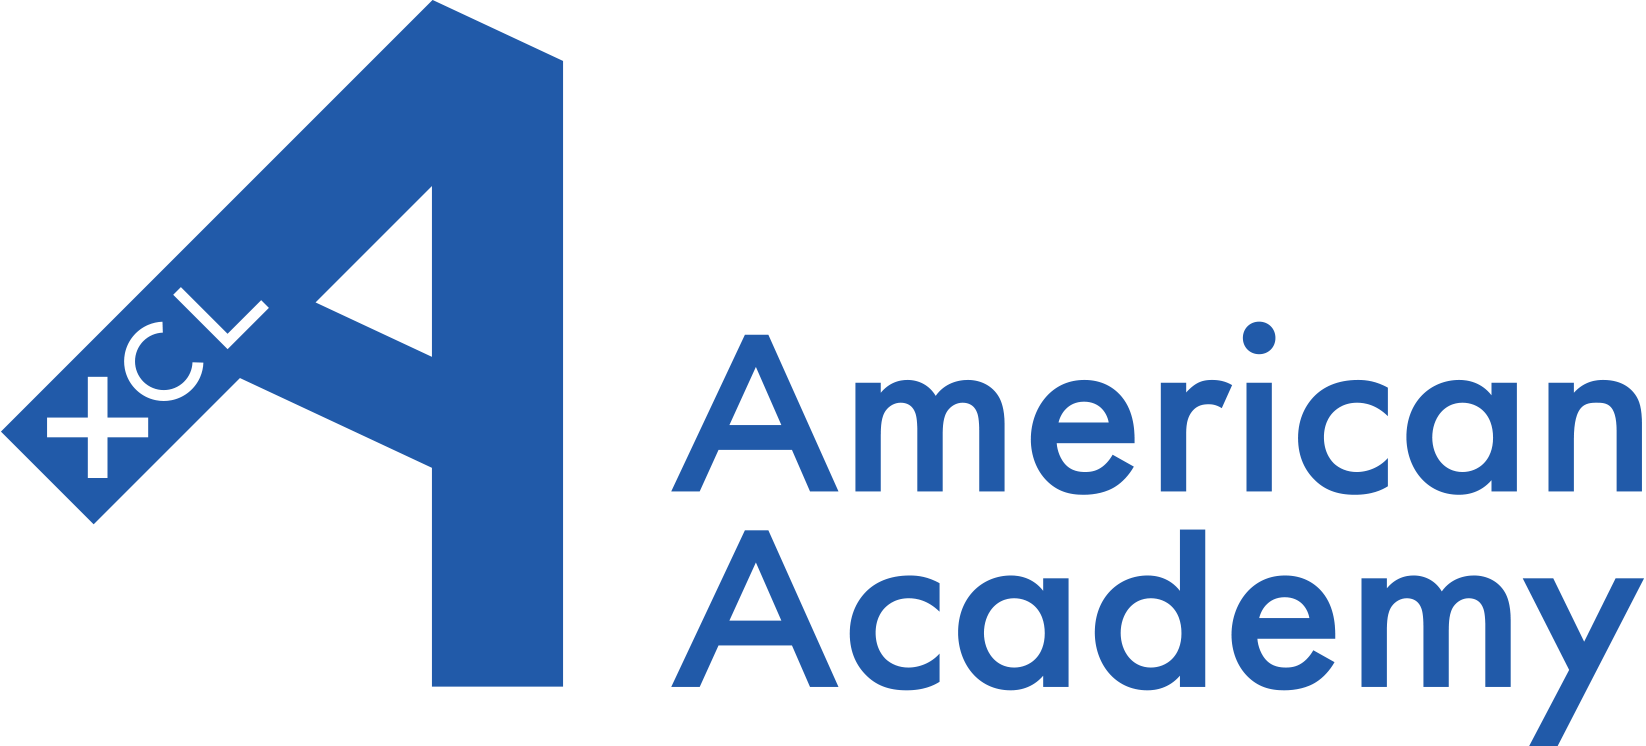 Company logo for Xcl American Academy Pte. Ltd.